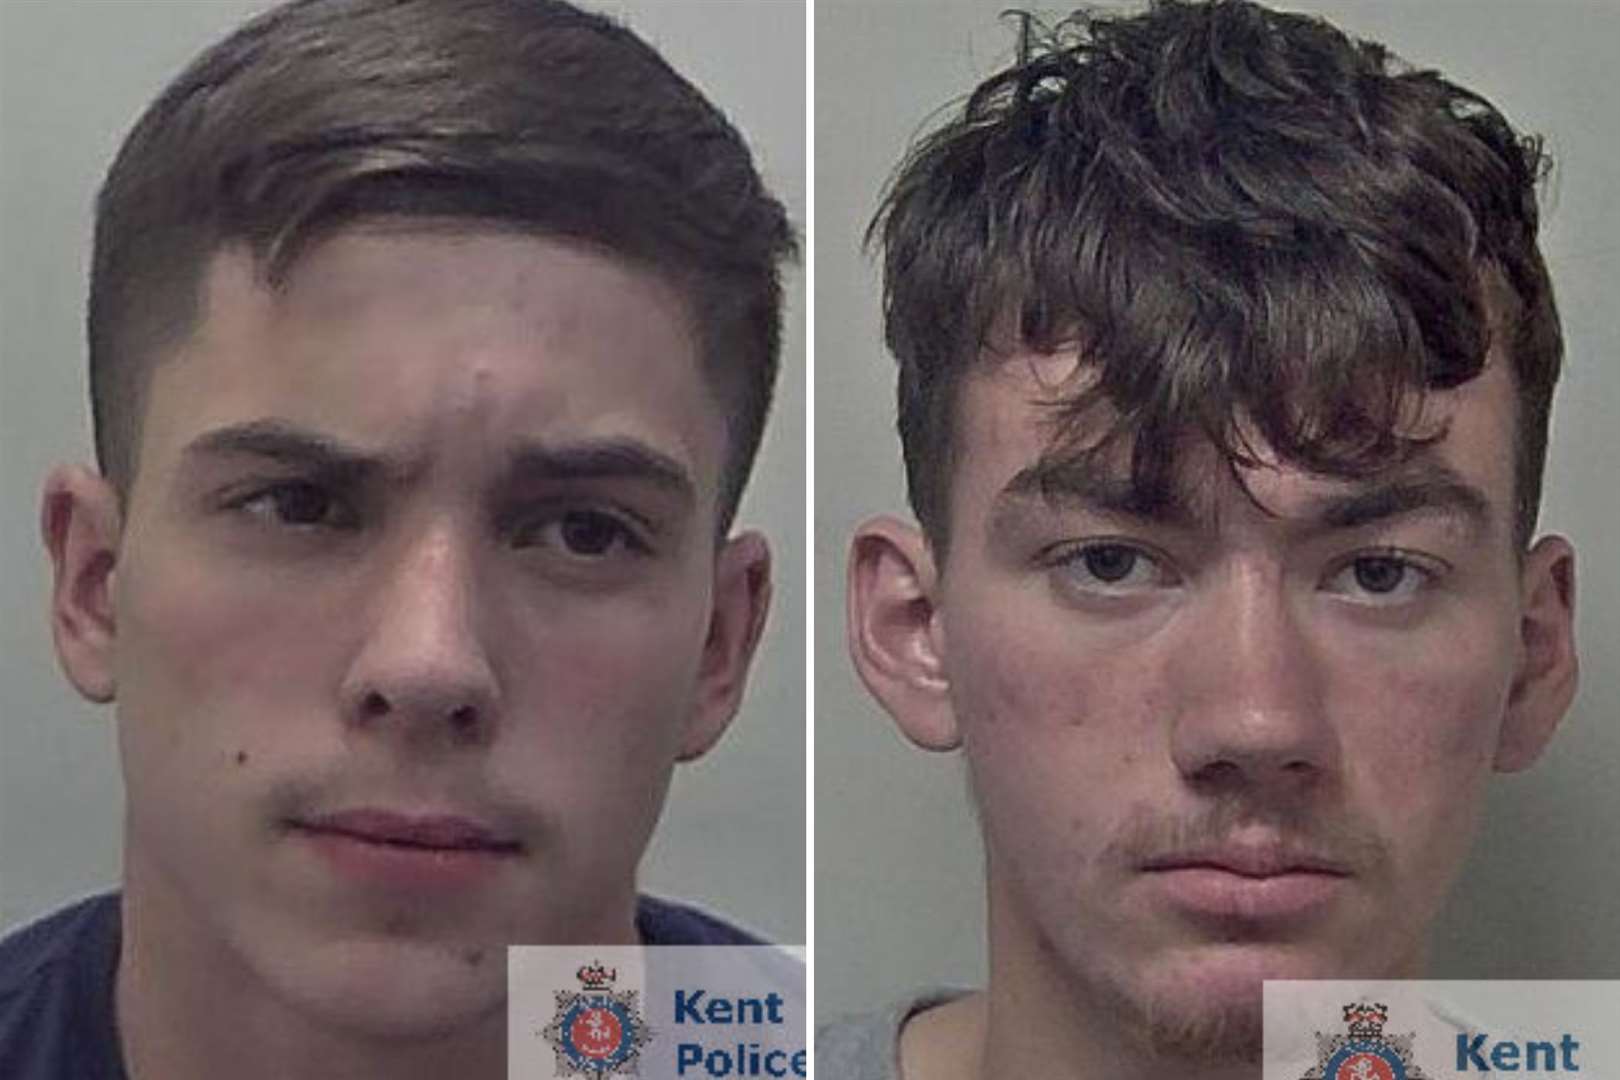 Luke Fogarolli and Jack Barron are behind bars for their part in the attack